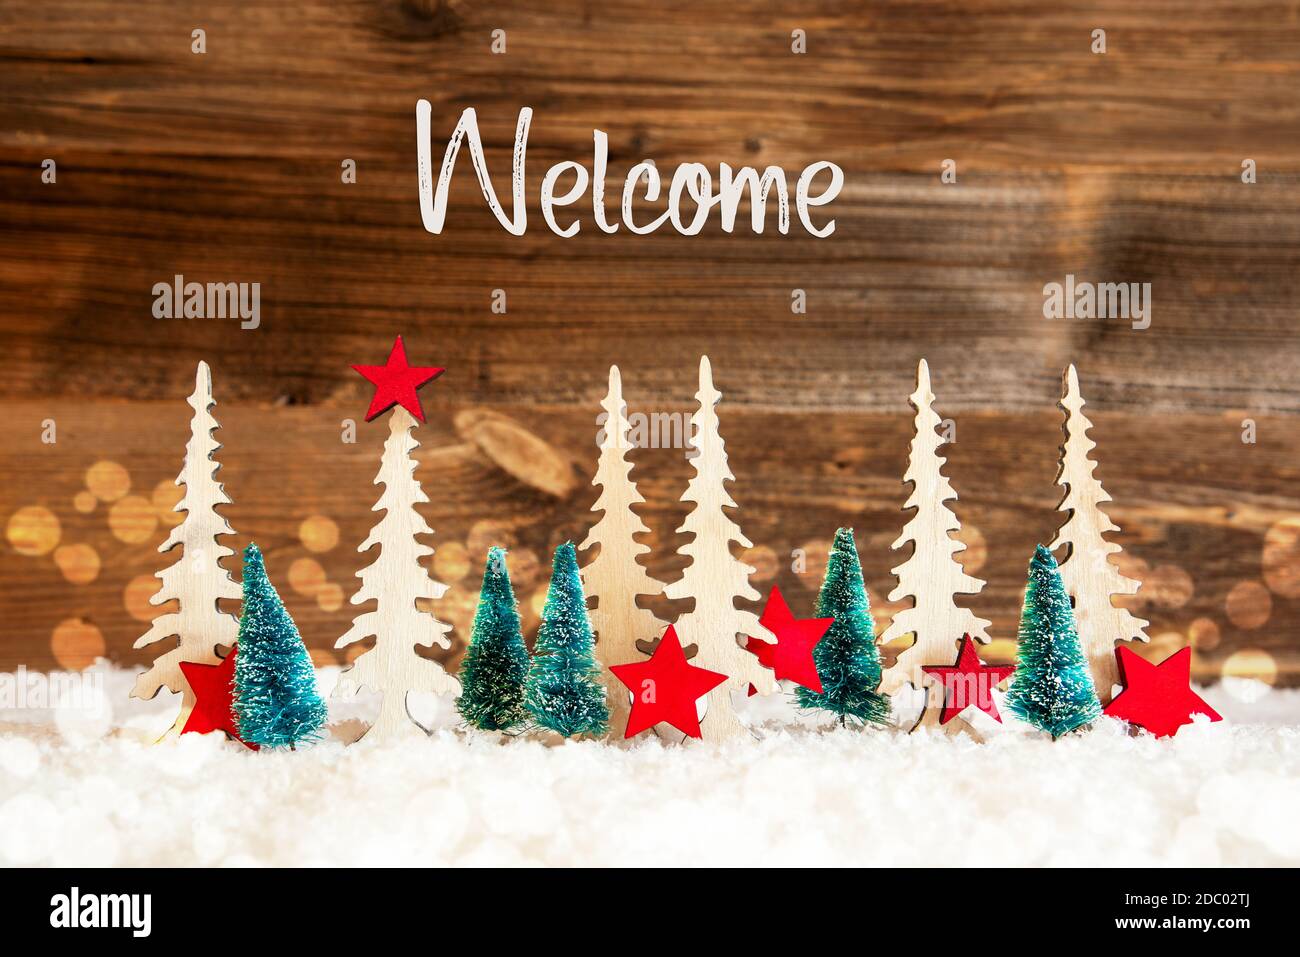 Christmas Trees With English Text Welcome. Christmas Decoration Like Red  Star Ornament. Rustic Brown Wooden Background With Snow And Bokeh Effect  Stock Photo - Alamy